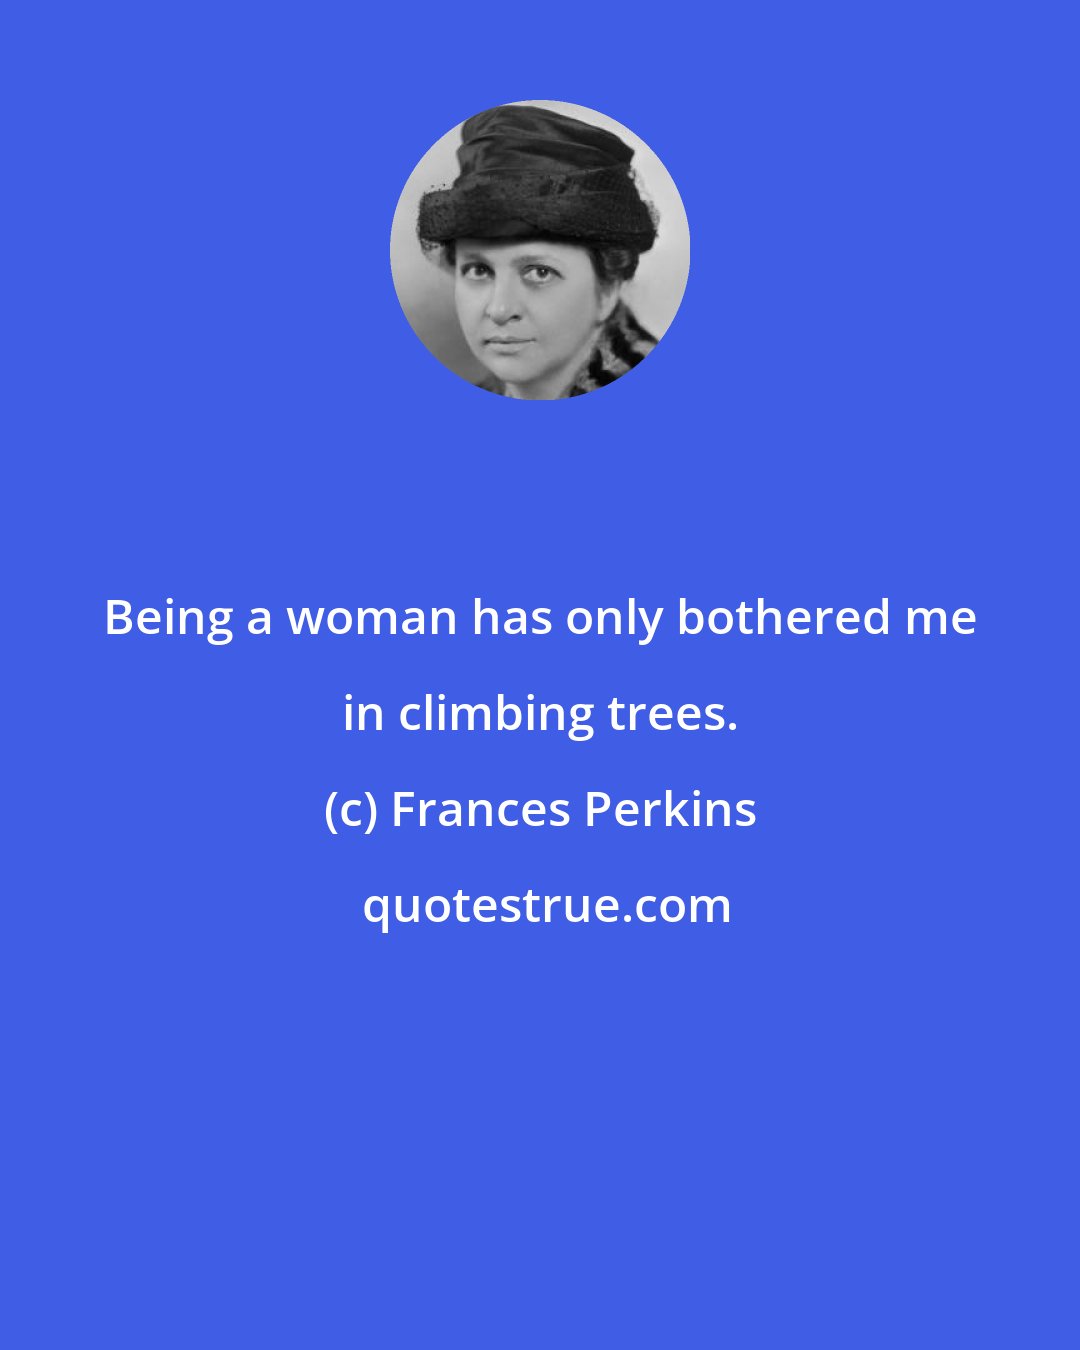 Frances Perkins: Being a woman has only bothered me in climbing trees.